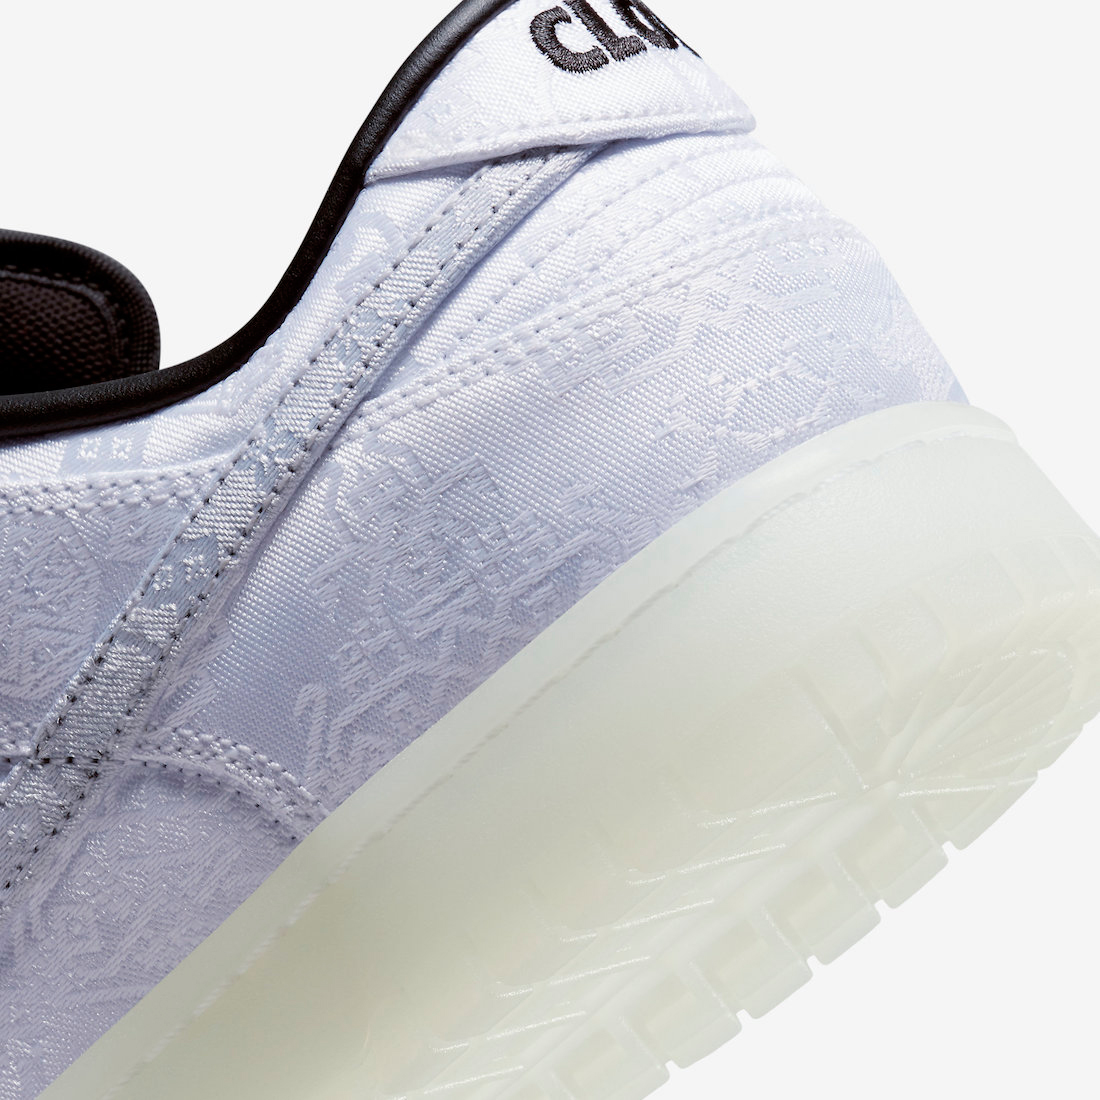 Clot-Fragment-Design-Nike-Dunk-Low-Release-Date-8